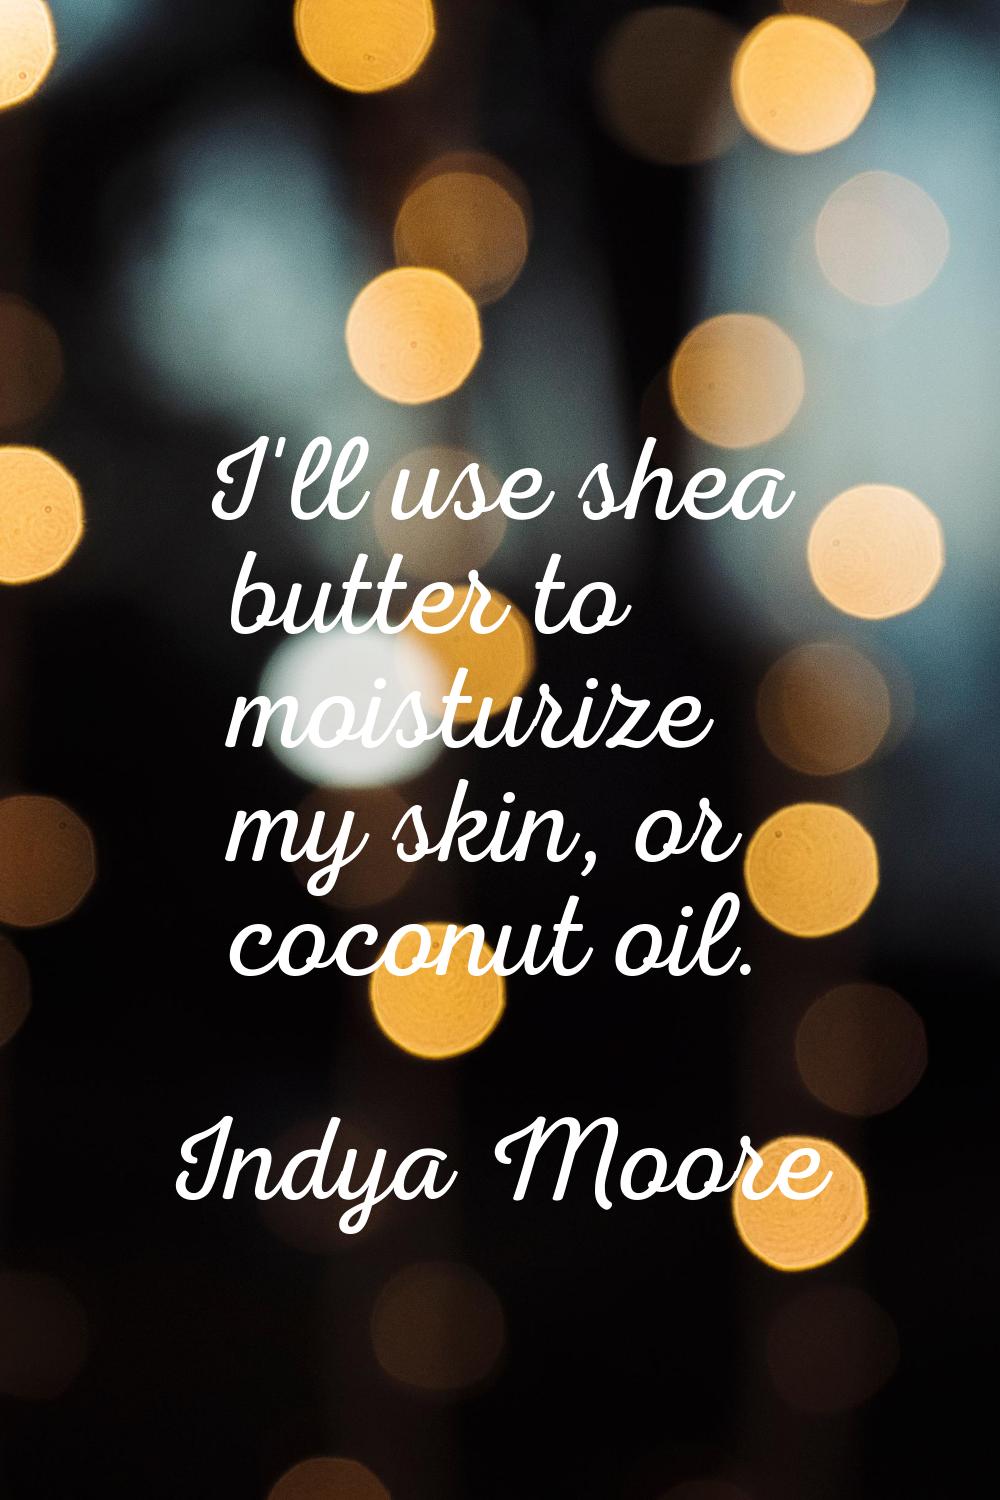 I'll use shea butter to moisturize my skin, or coconut oil.